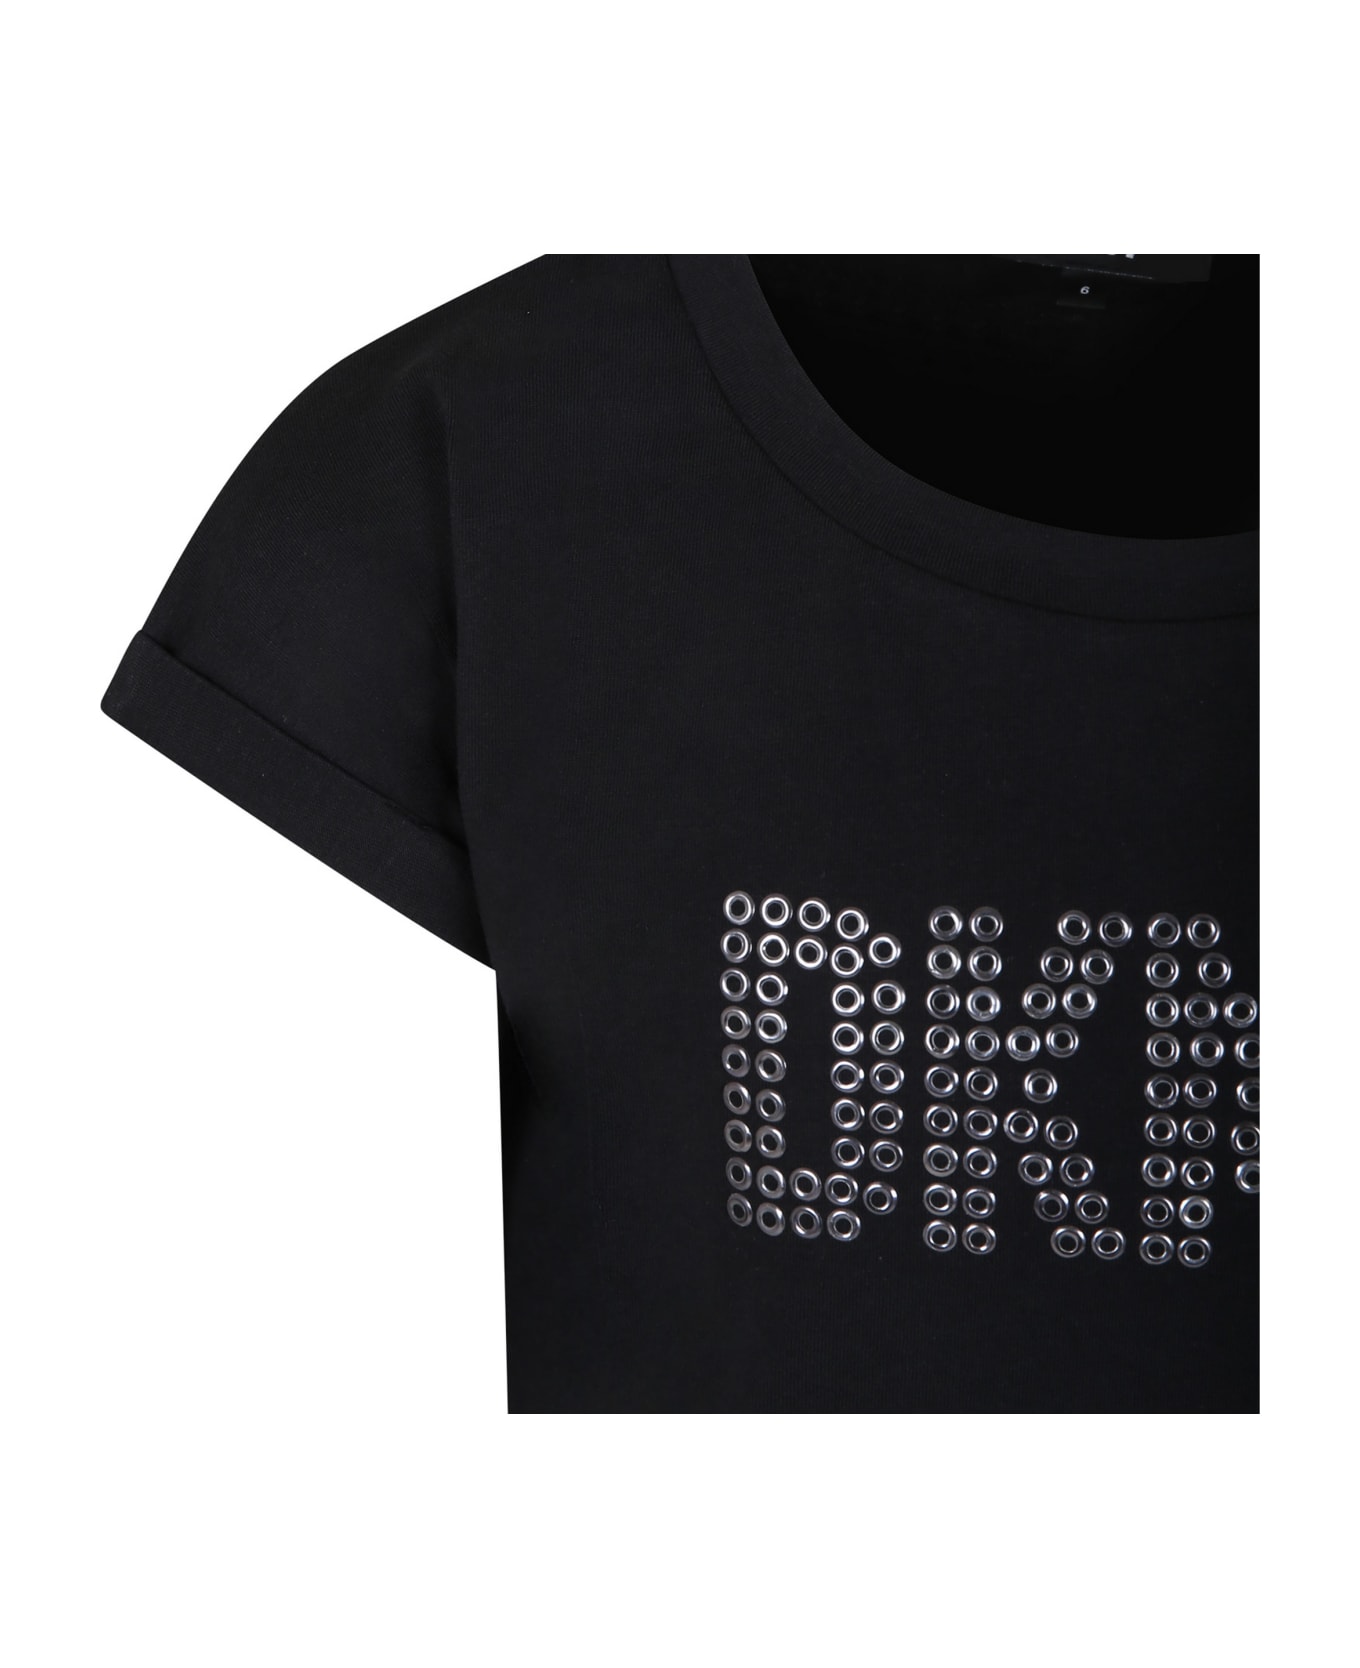 DKNY Black T-shirt For Girl With Logo And Studs - Black